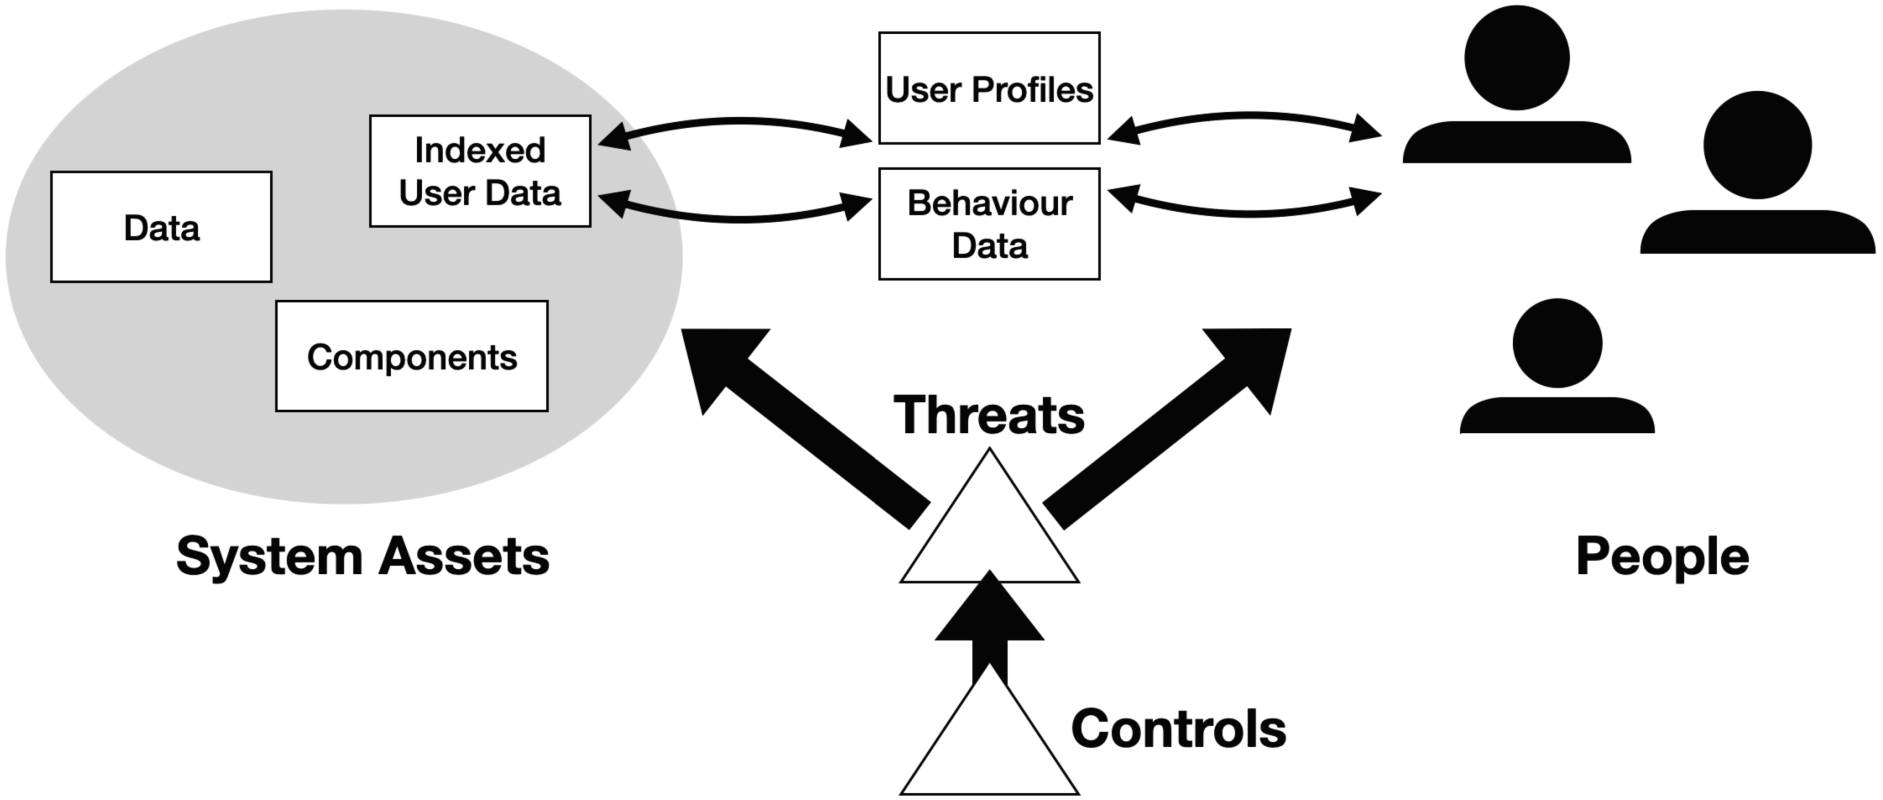 Extending risk management artefacts to accommodate sociotechnical risk management. Individual people may interact with a system in such a way that user profiles and behaviour data are generated and maintained. These are then indexed user data, generated as system activities alongside the behaviours of people using a system.